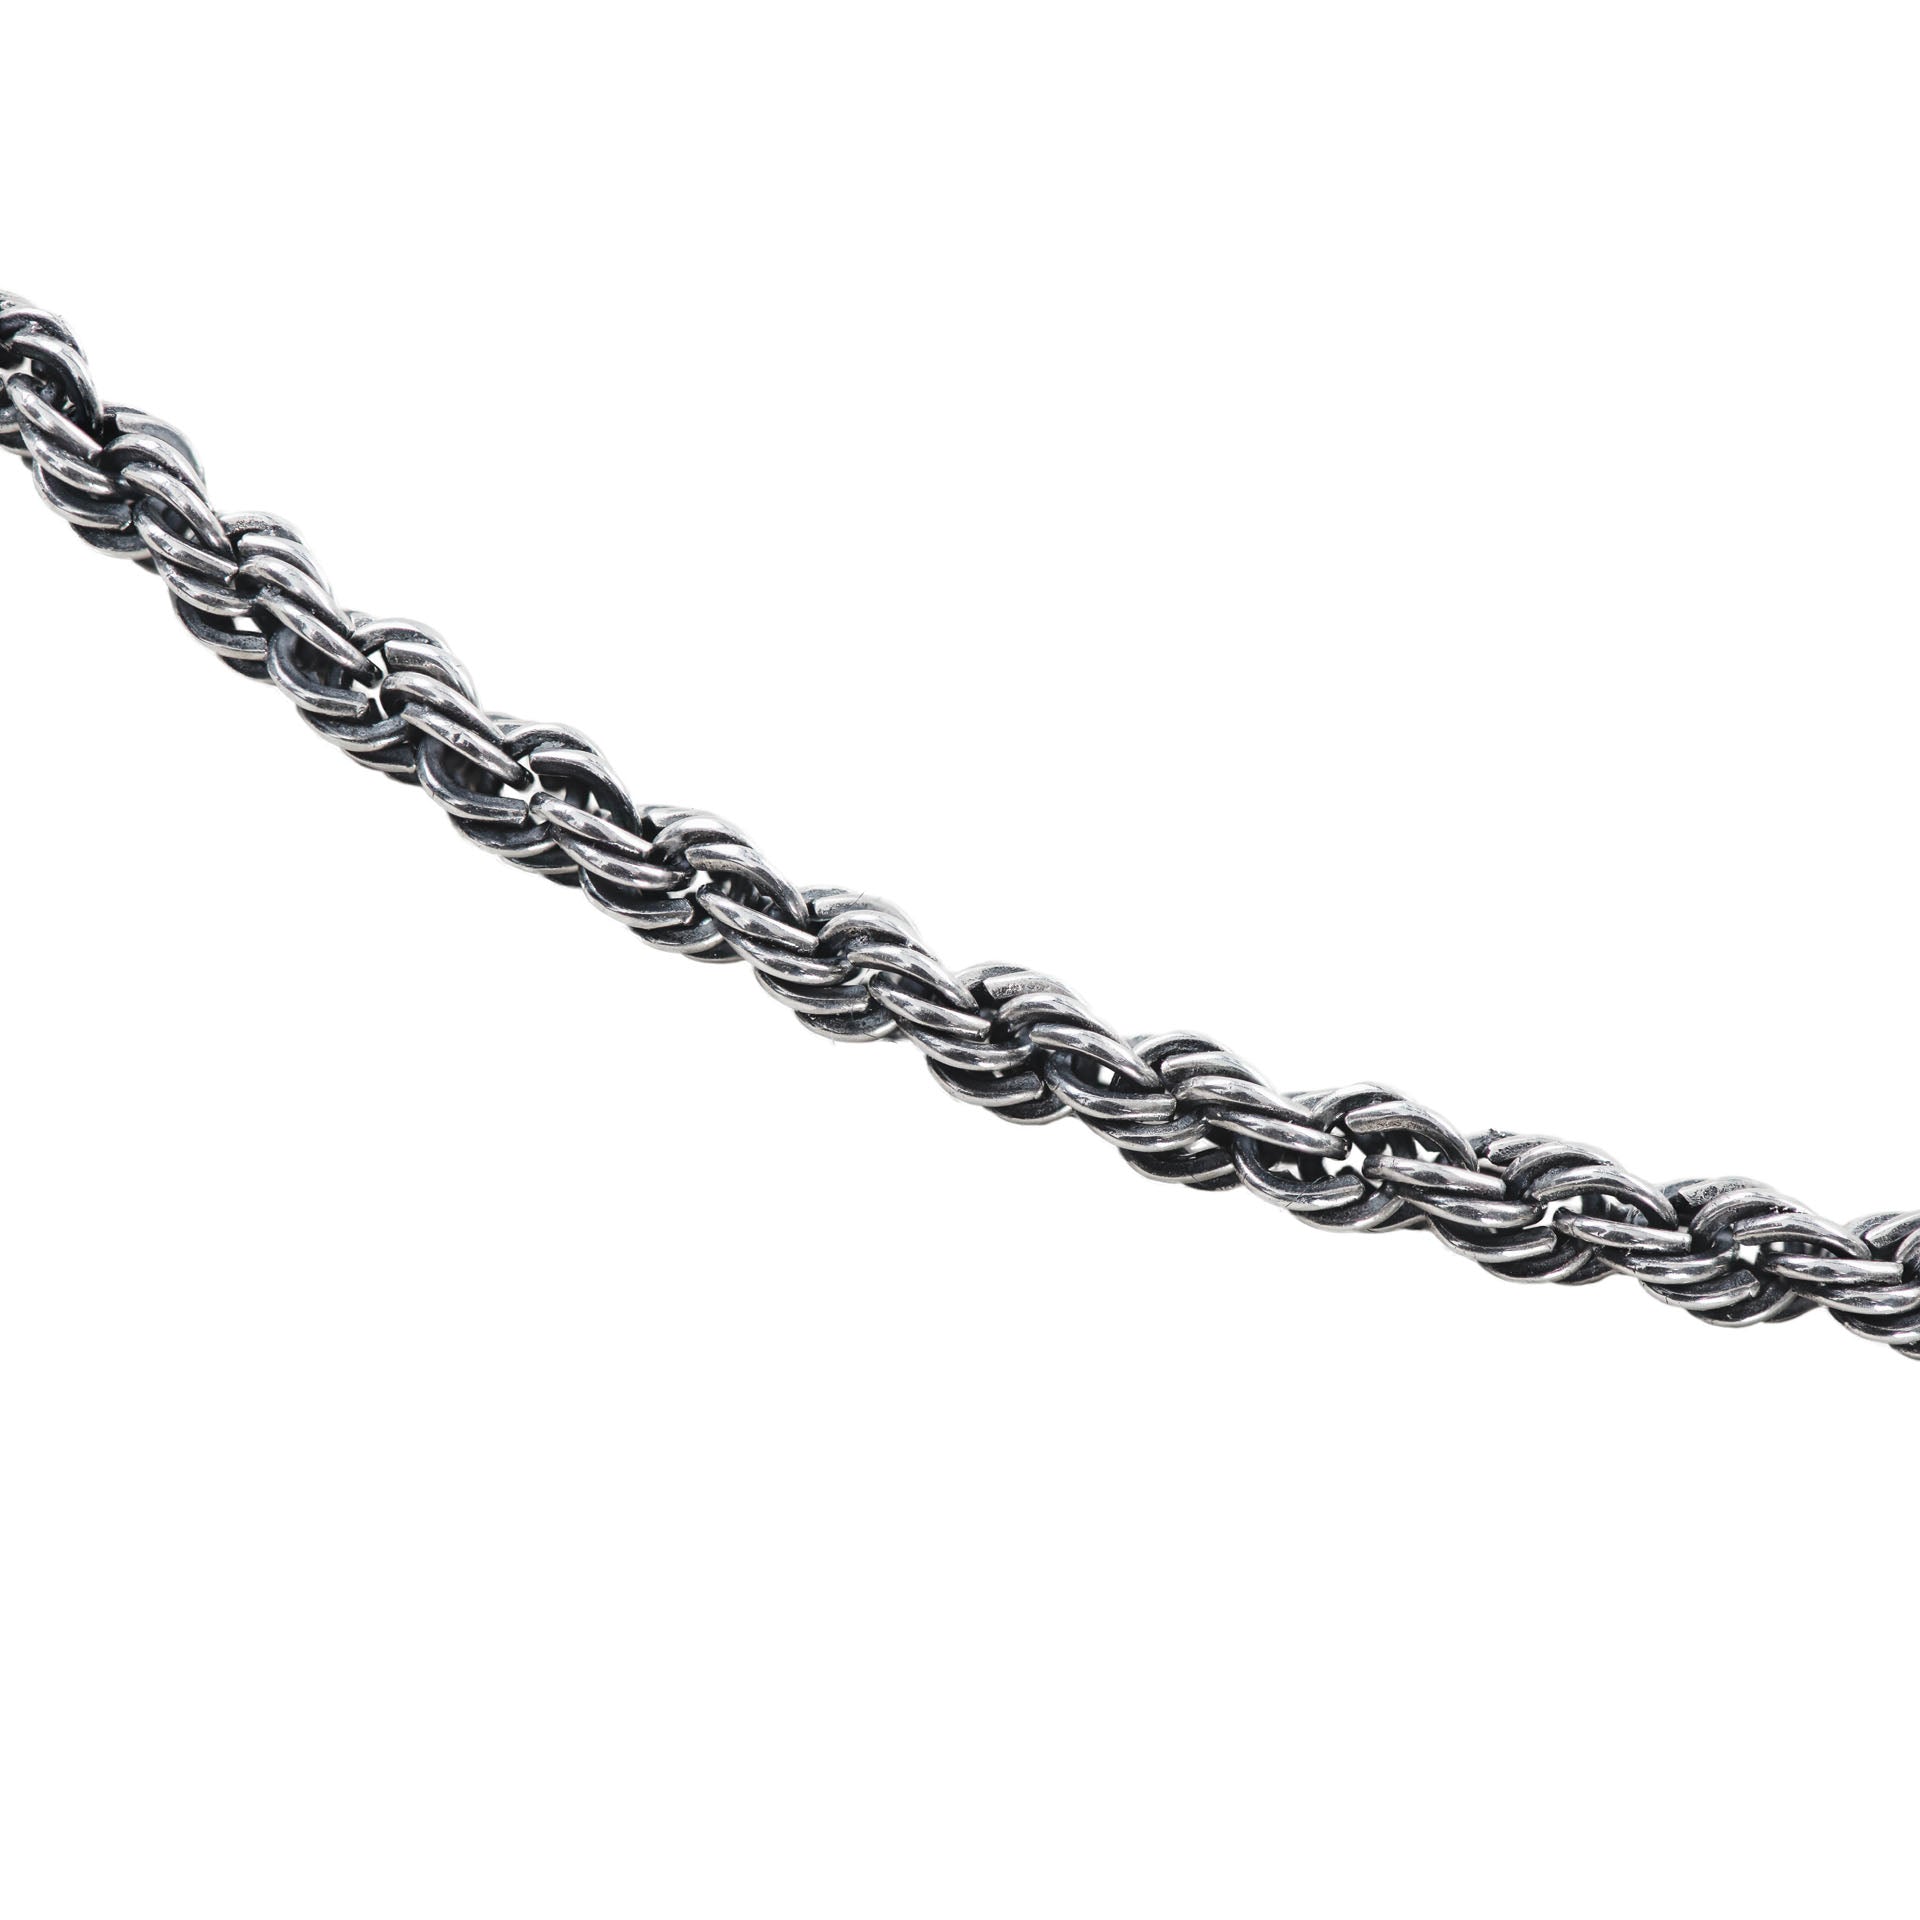 TWISTED CHAIN. - 925 Silver Rope Chain 3mm - PALM. | Handcrafted Jewelry-